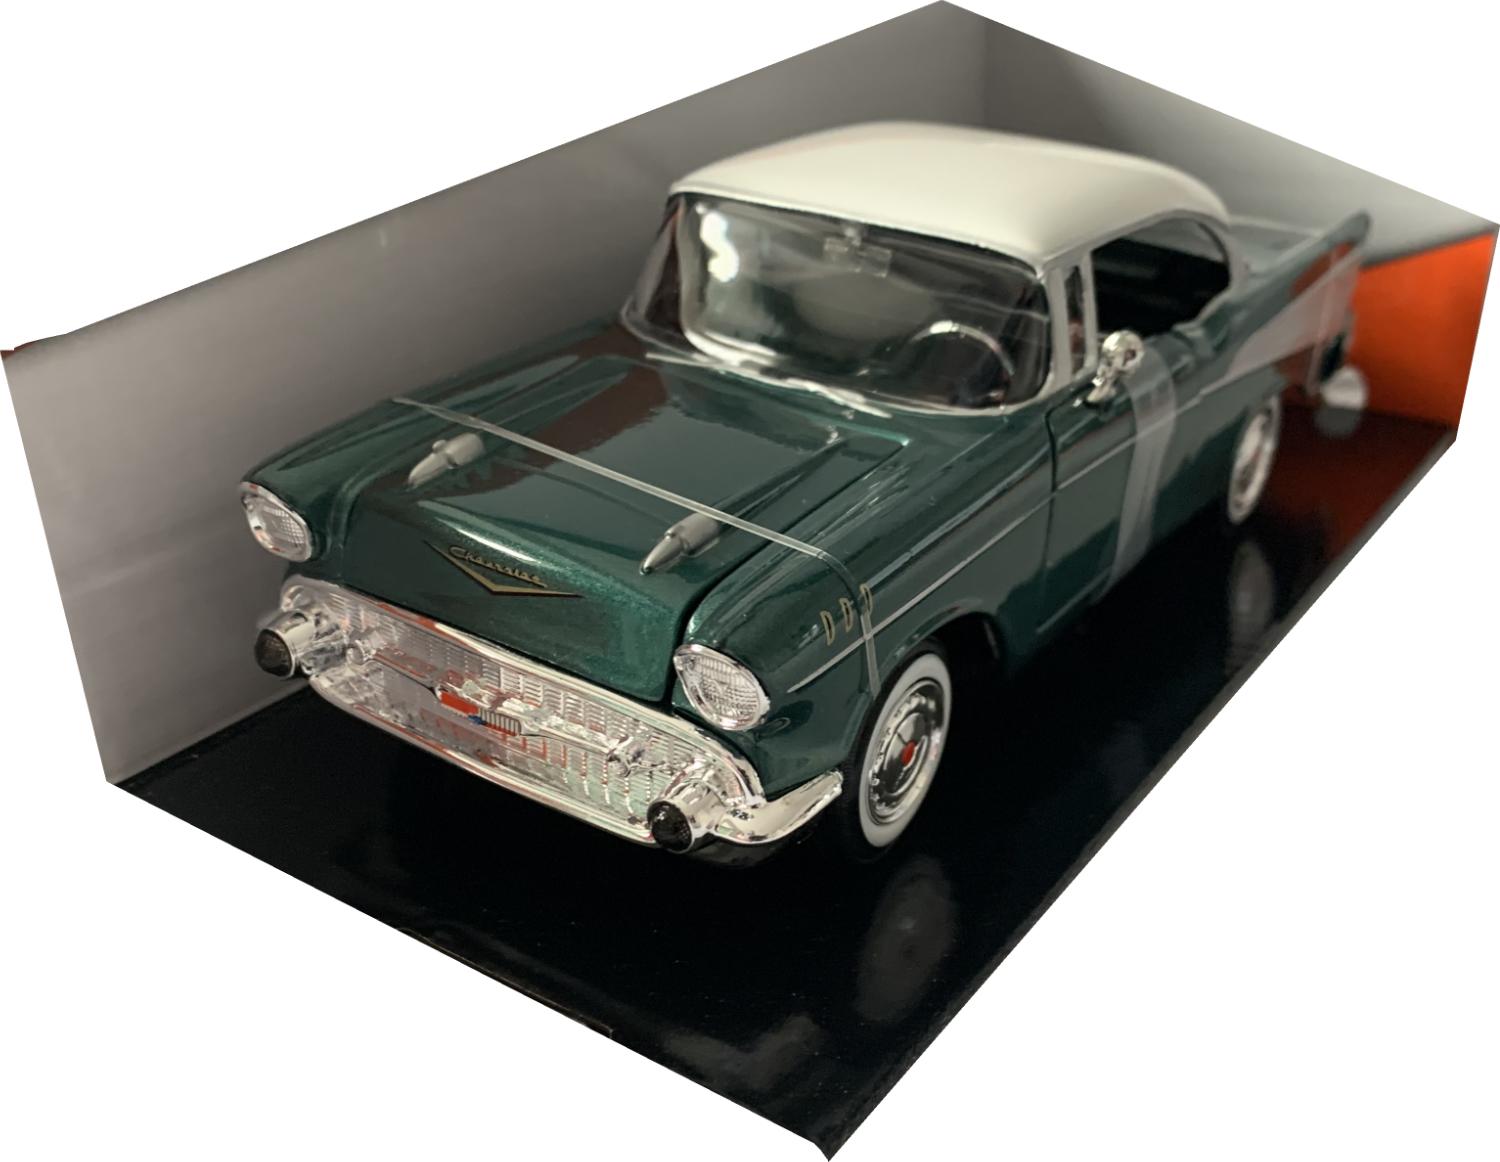 A good reproduction of the Chevrolet Bel Air with detail throughout, all authentically recreated. The model is presented in a window display box, the car is approx. 20.5 cm long and the presentation box is 24cm